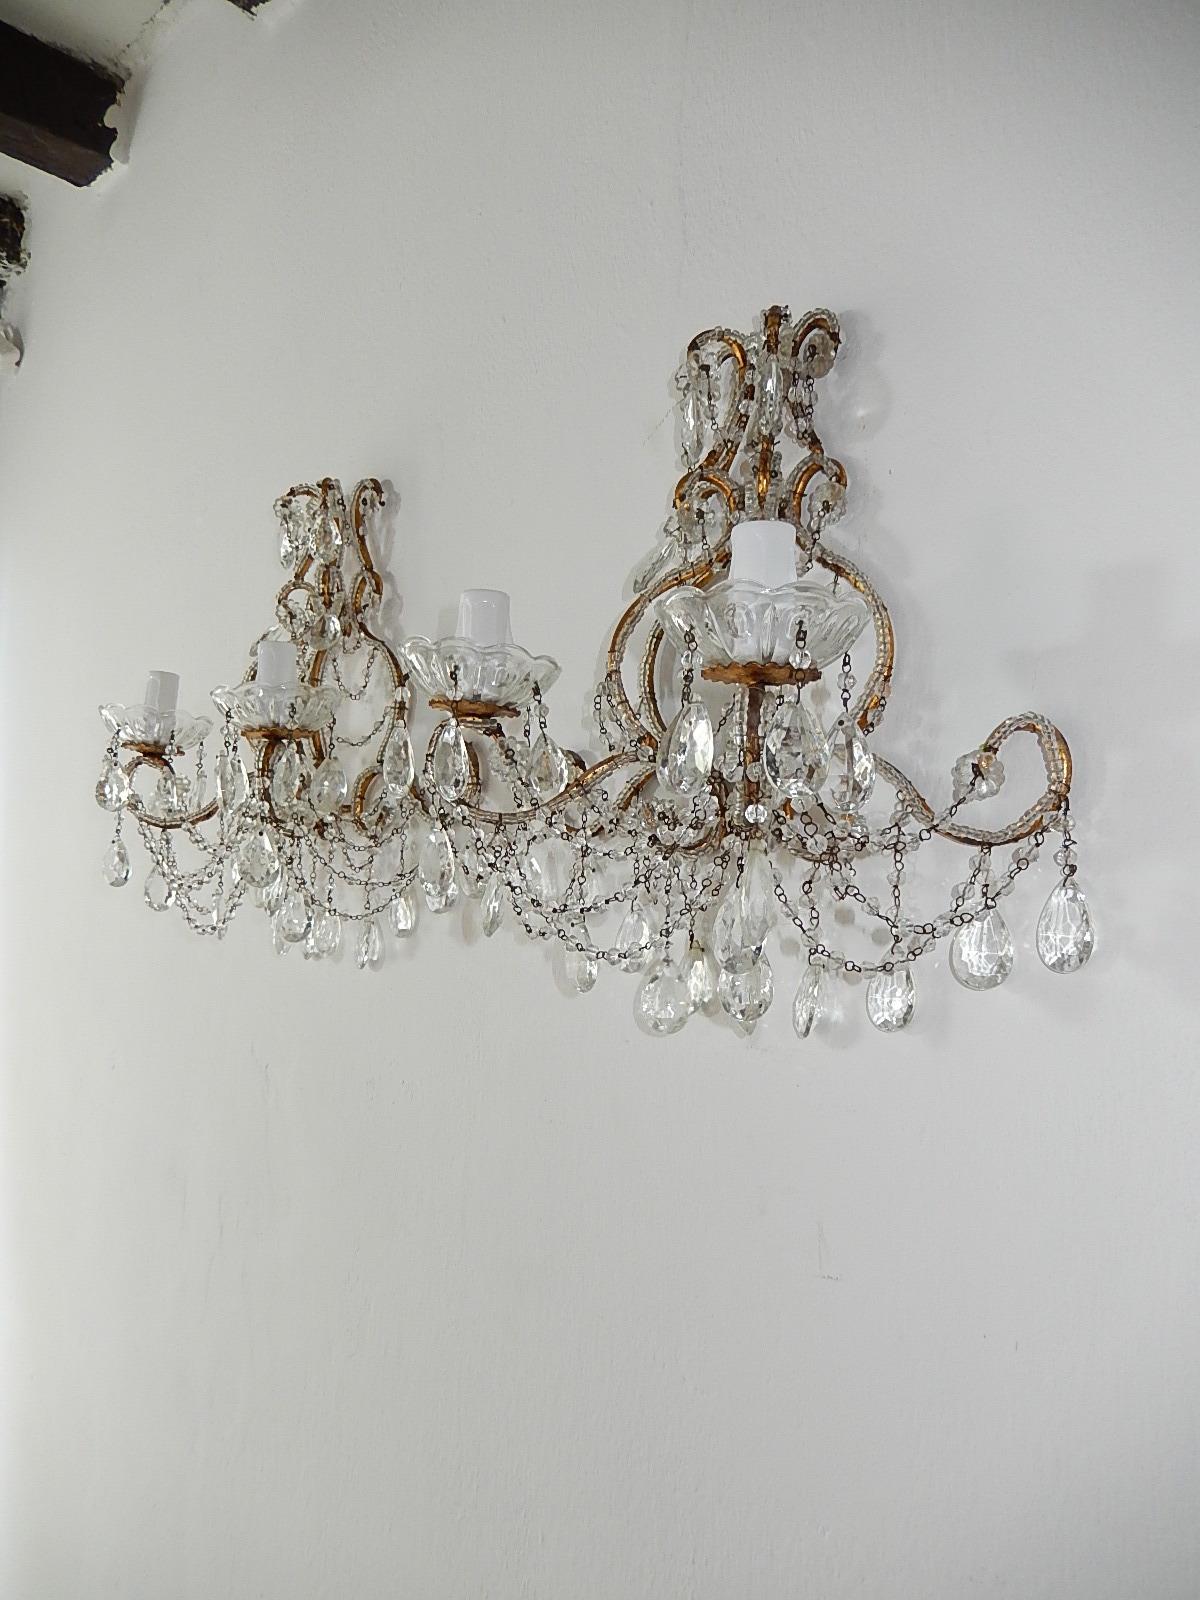 1900 Italian Rococo Beaded Crystal Prisms Gold Gilt Sconces In Good Condition For Sale In Firenze, Toscana